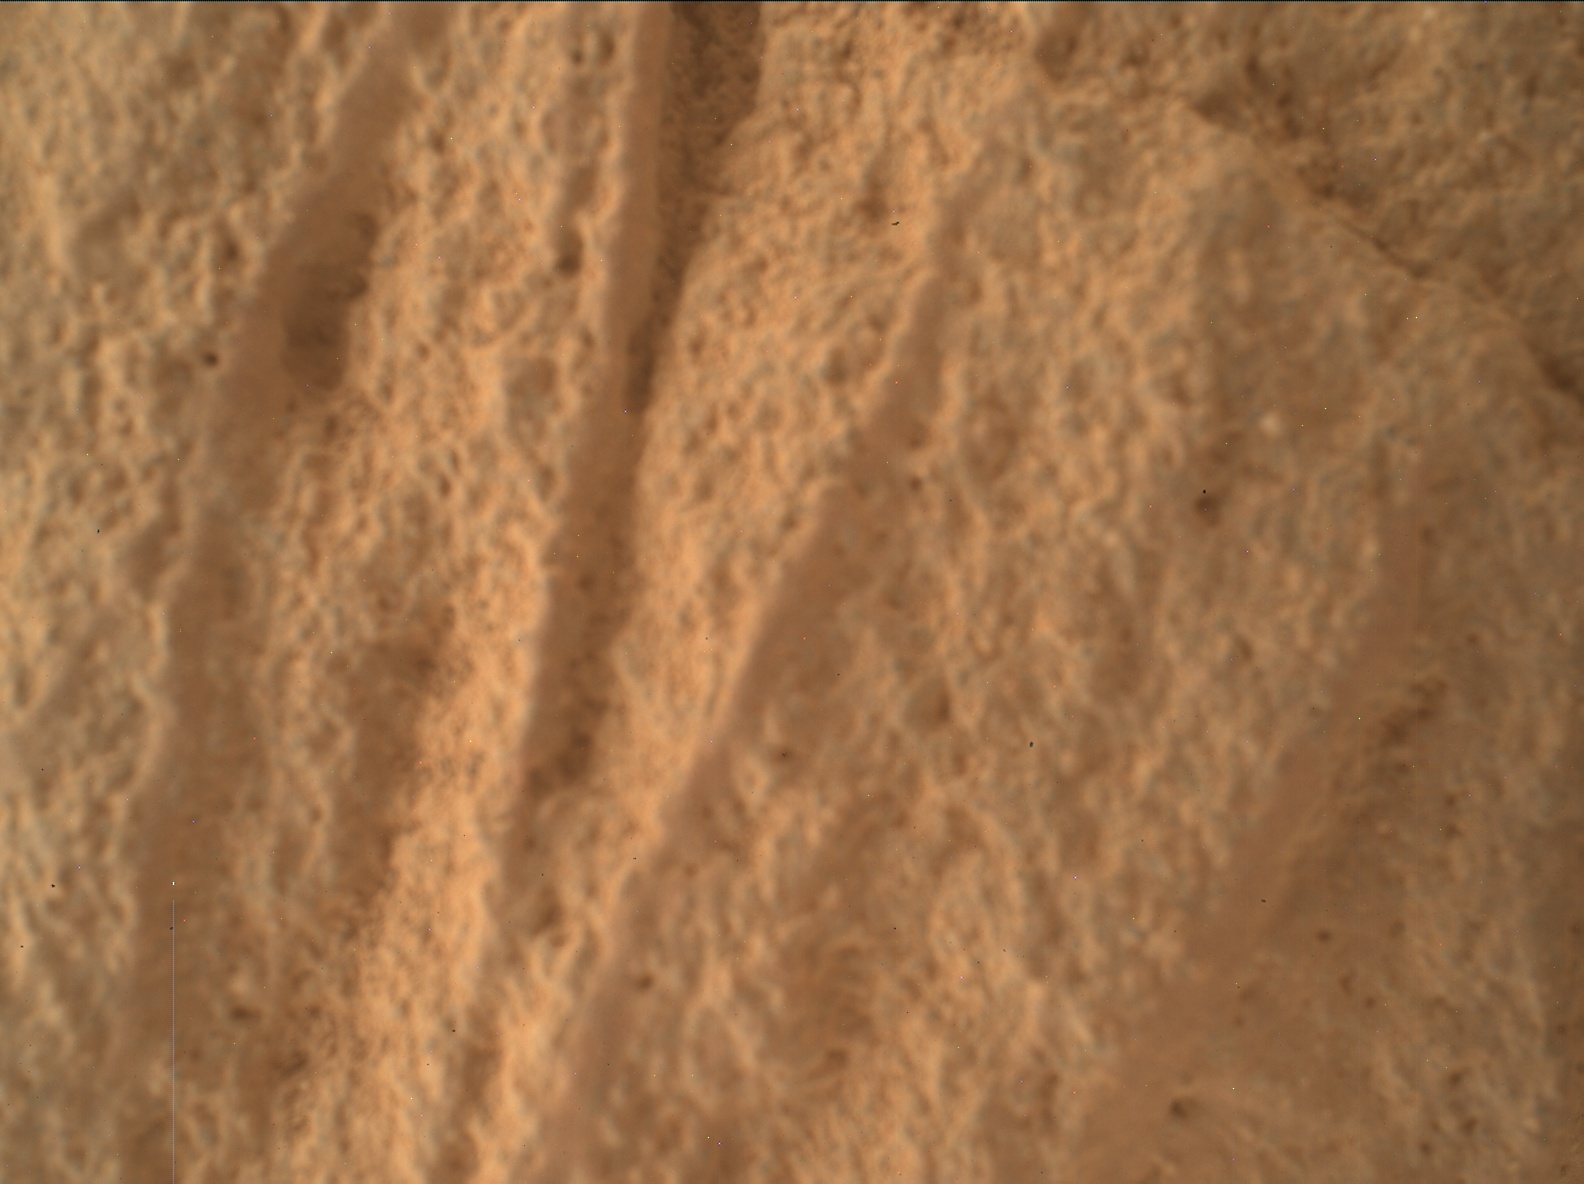 Nasa's Mars rover Curiosity acquired this image using its Mars Hand Lens Imager (MAHLI) on Sol 3376